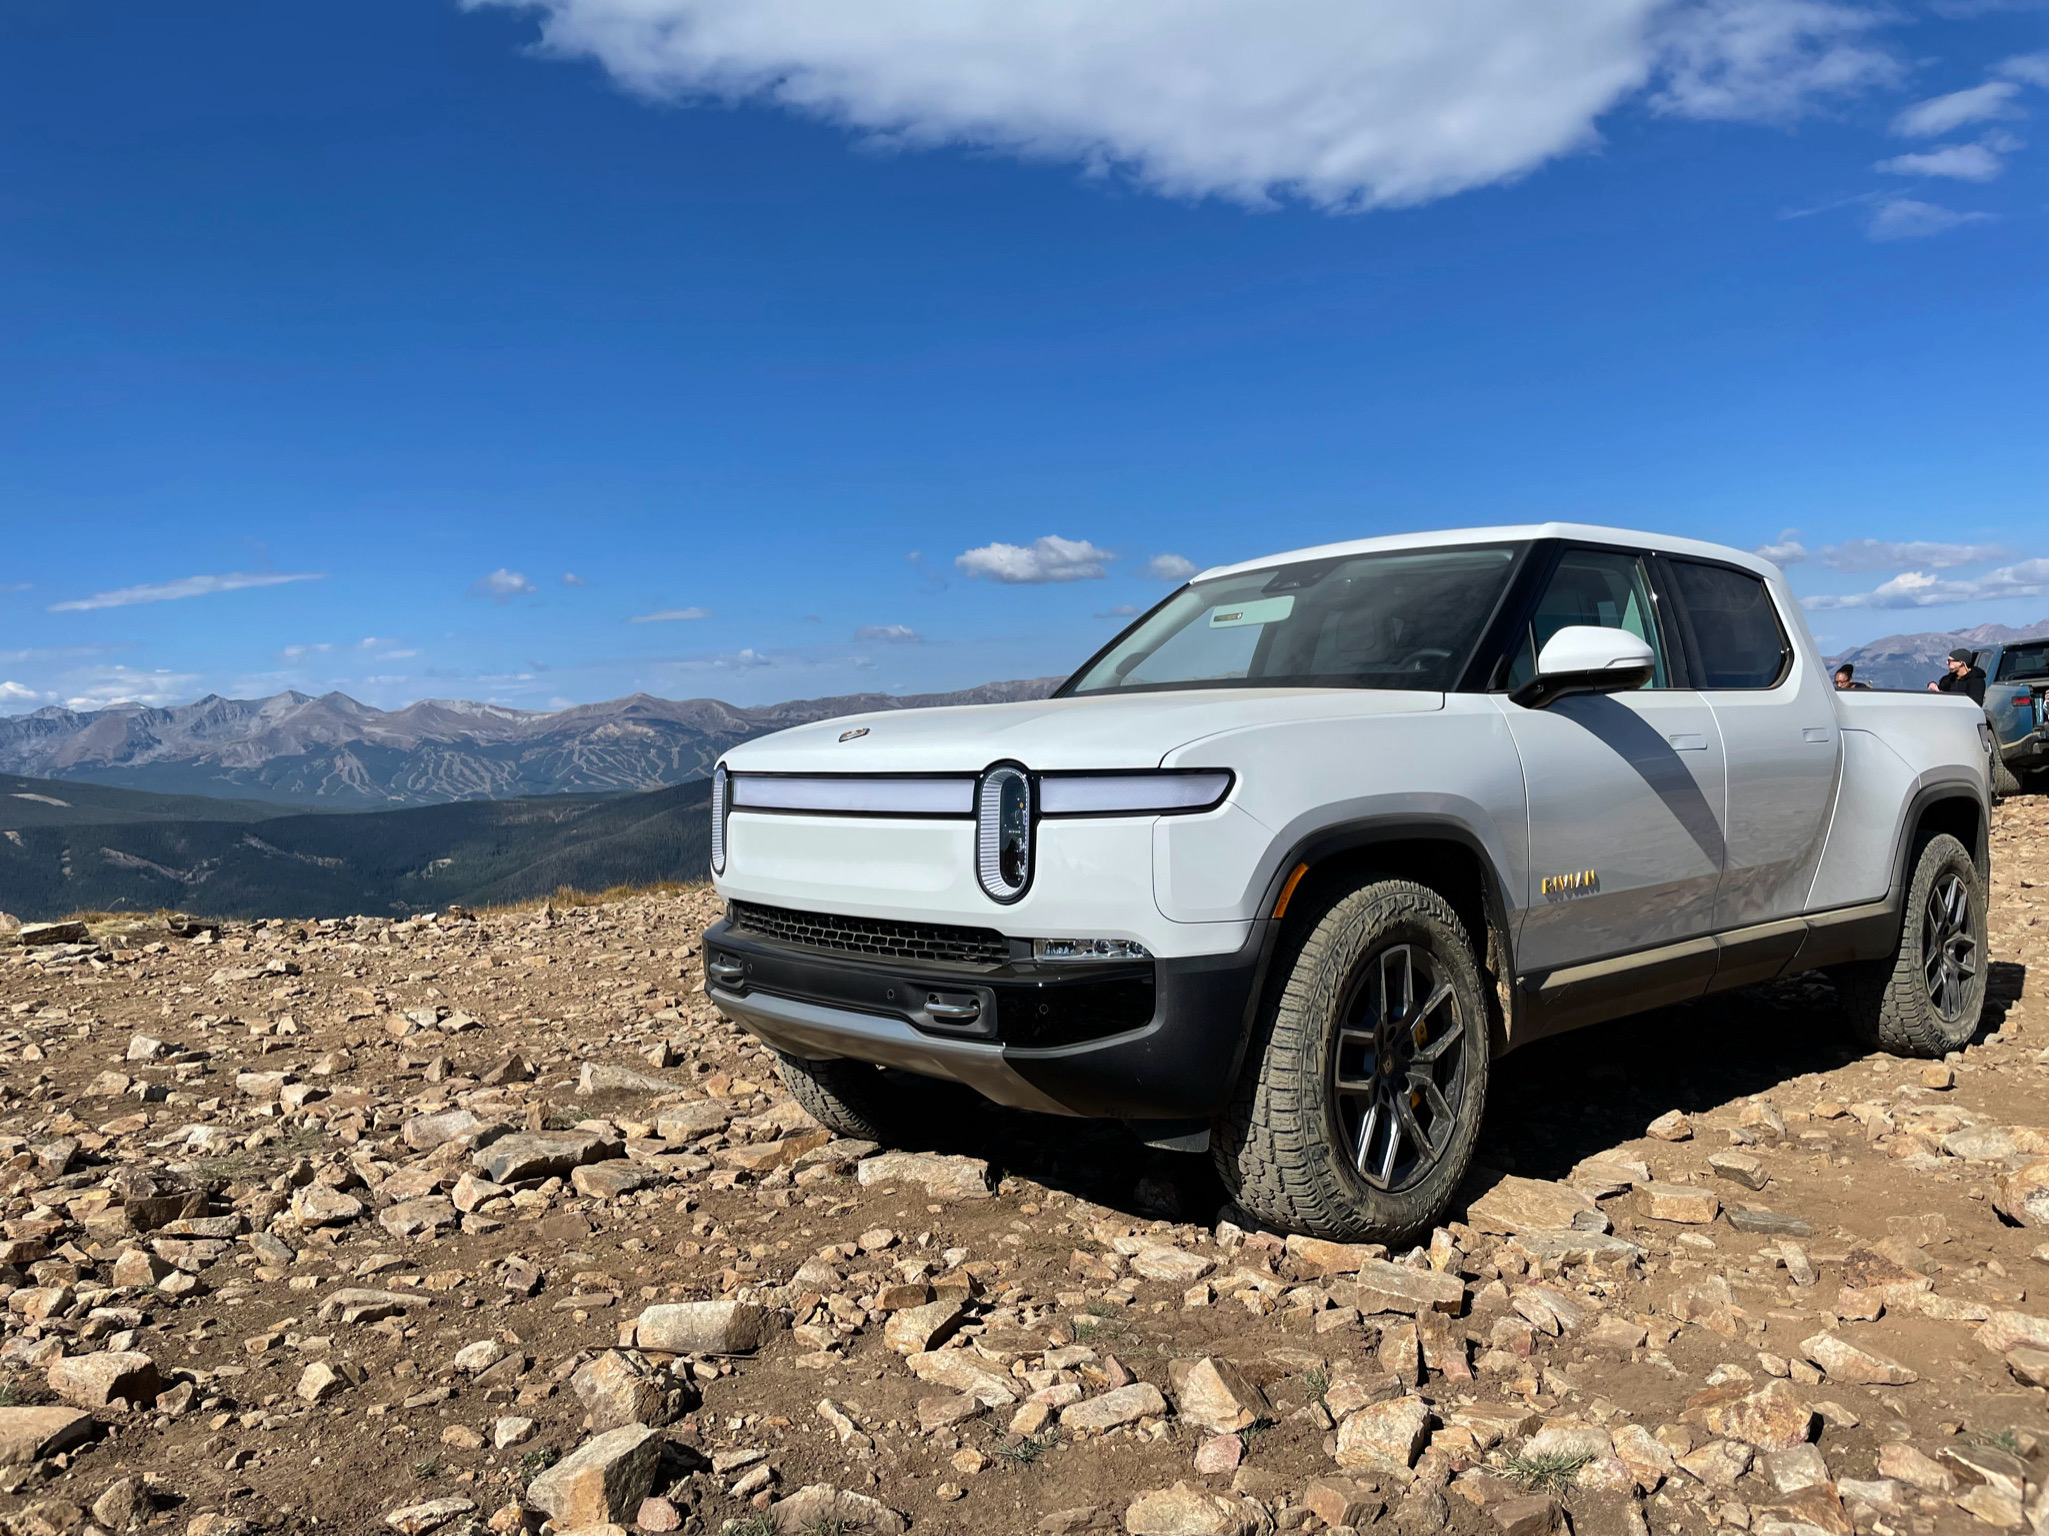 Rivian's R1T Passes World's Toughest Towing Test with Flying Colors - Excellent Electric Pickup for Unrivaled Efficiency